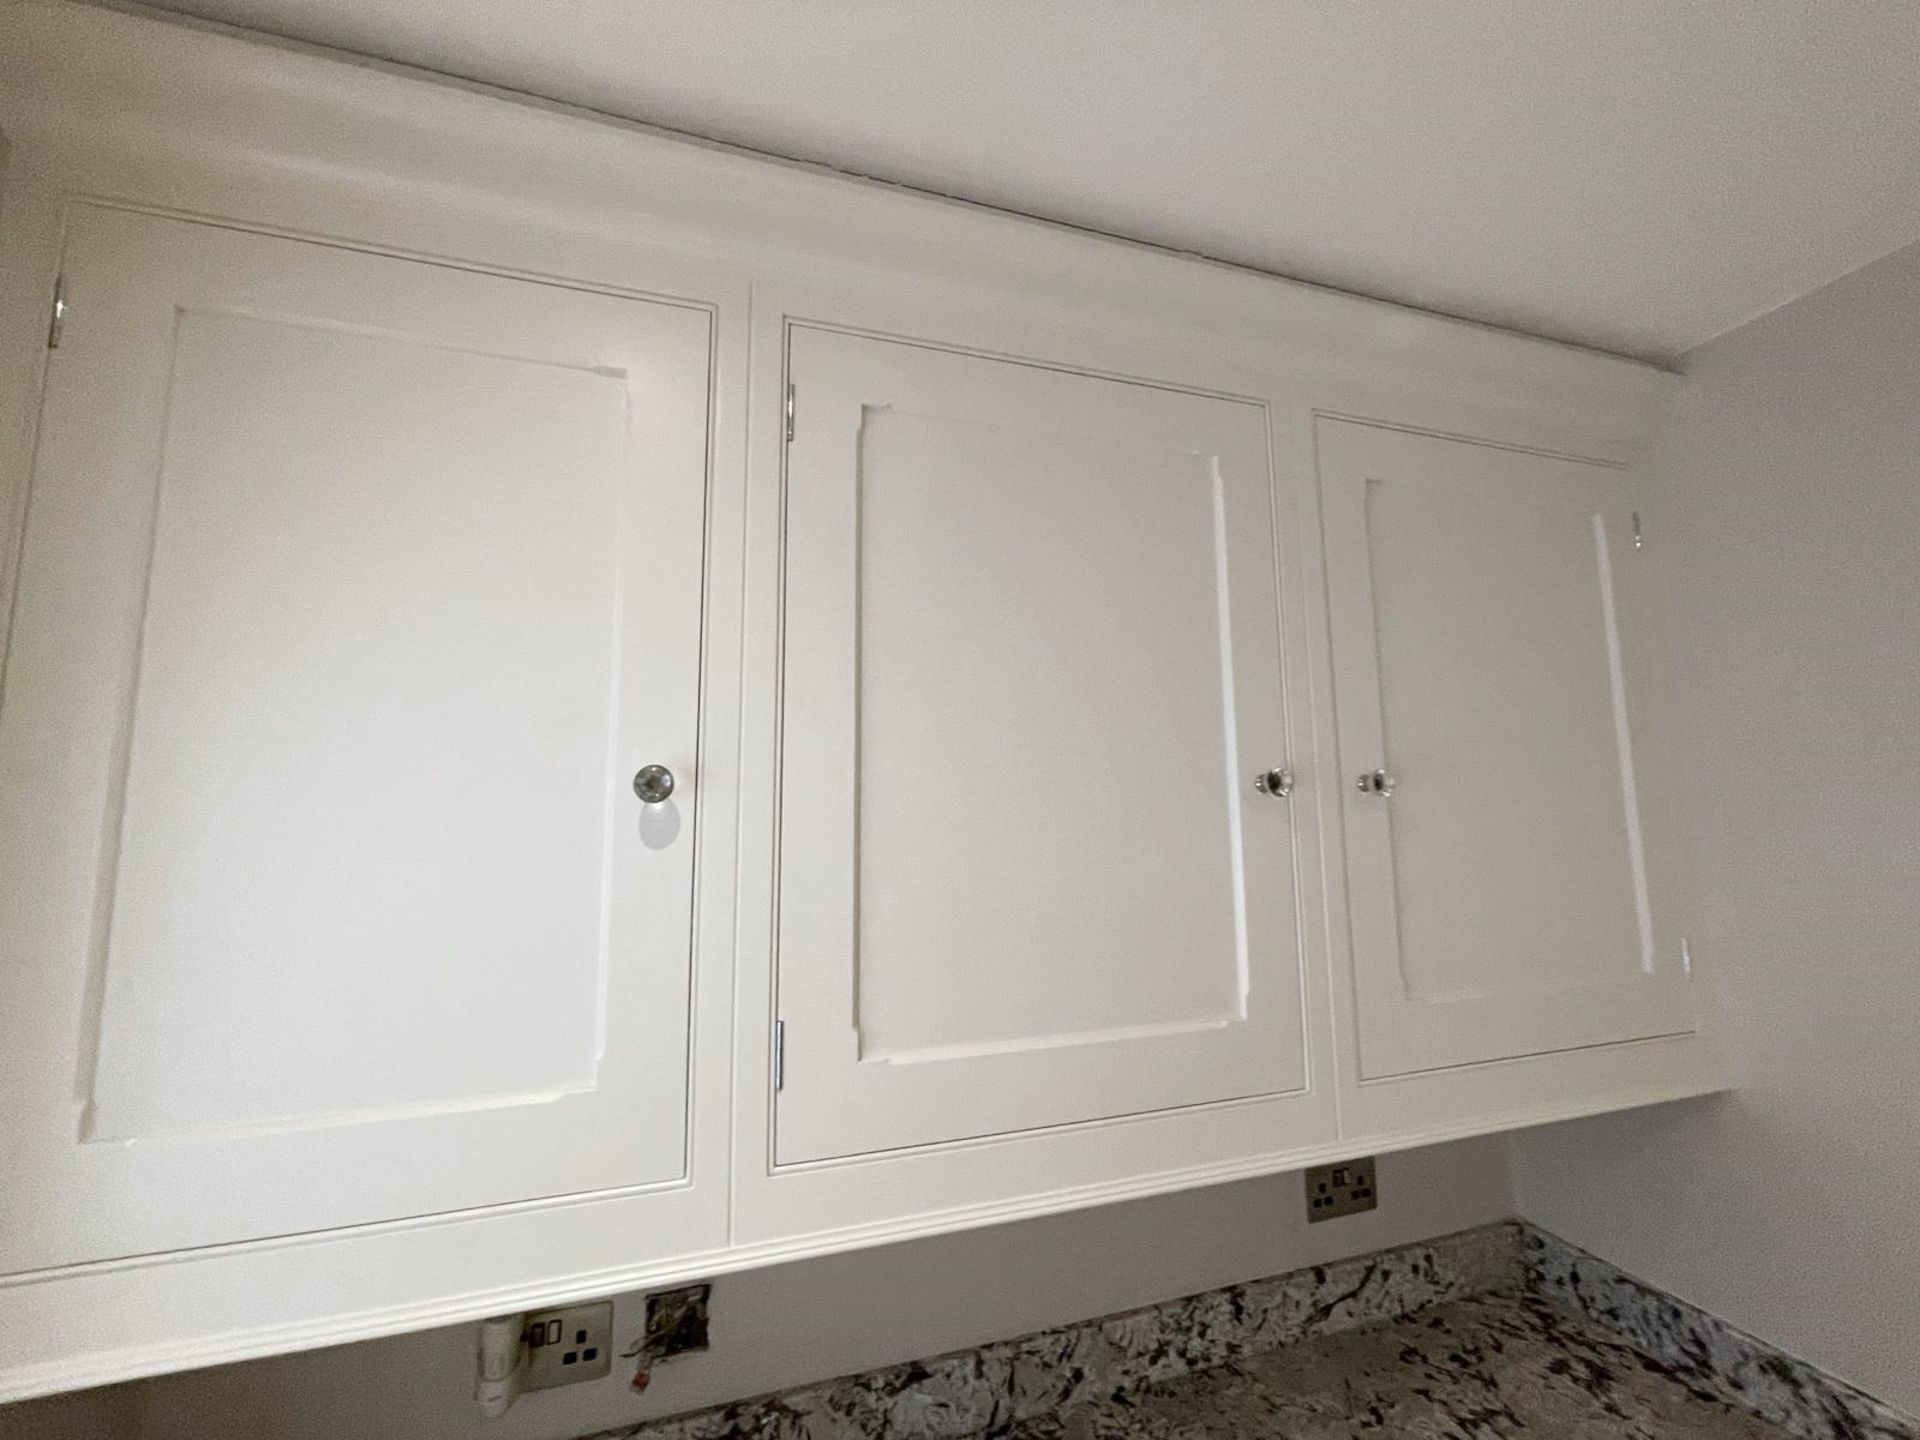 1 x Bespoke Fitted Solid Wood Kitchen with Natural Bianco Antico Grantite Work Surfaces - Image 31 of 61